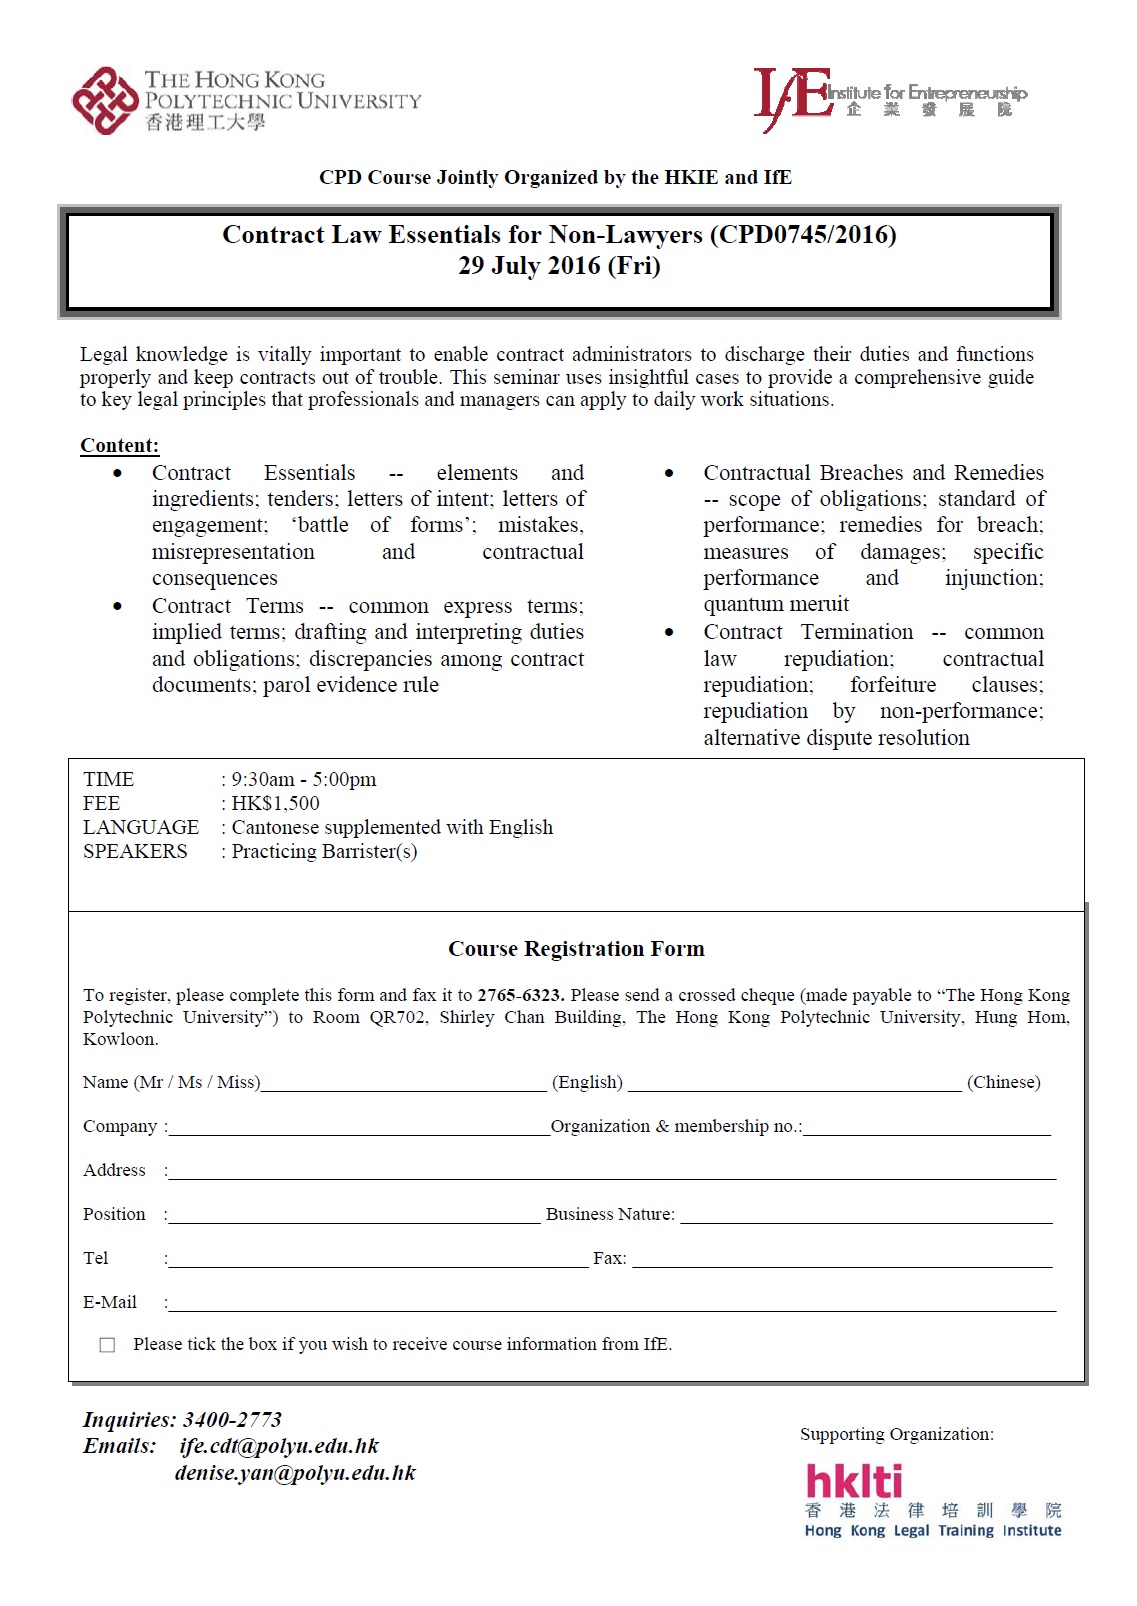 hklti hkpu contract law essentials for non lawyers flyer 20160729